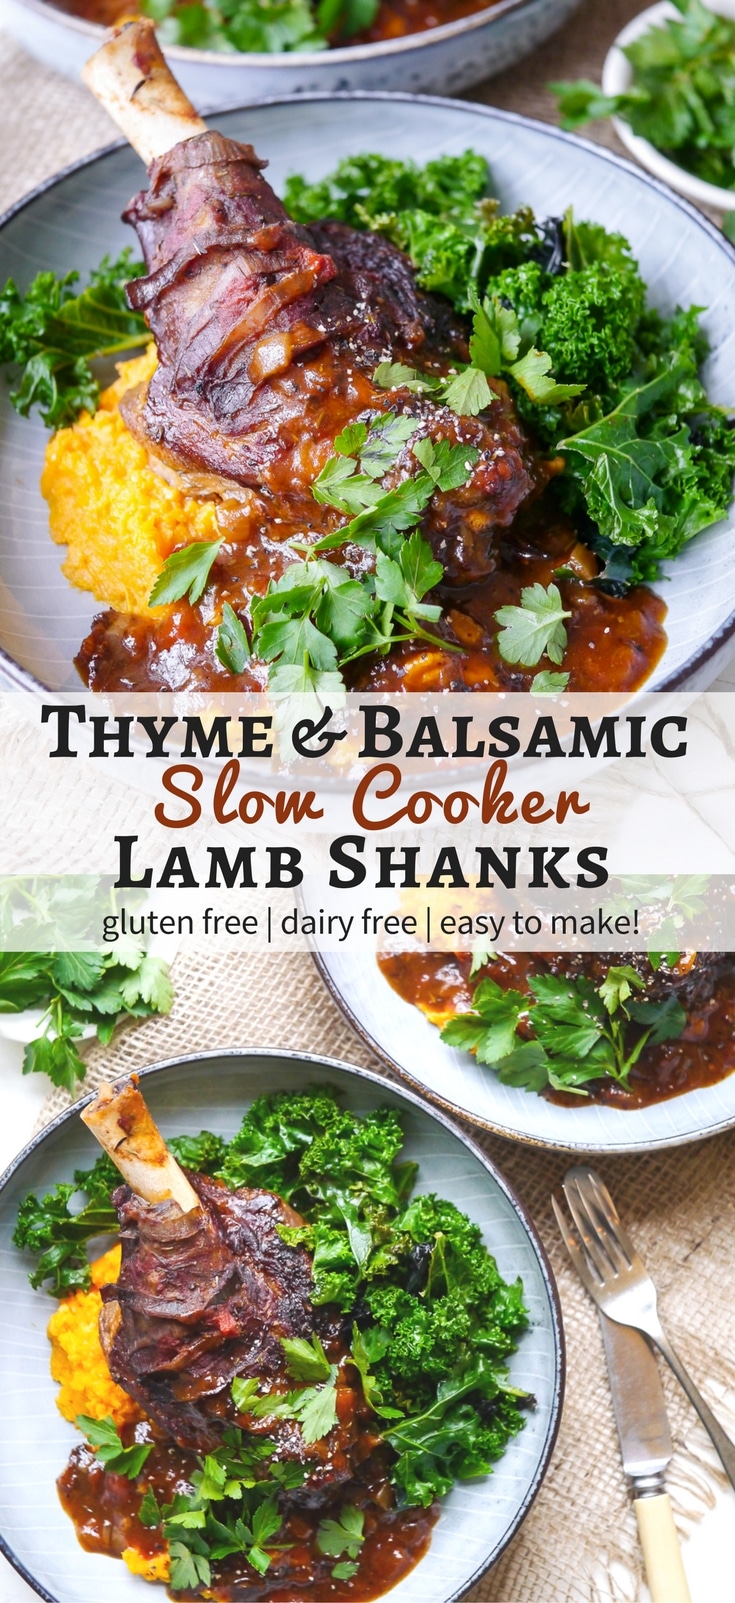 Thyme and Balsamic Slow Cooker Lamb Shanks - Nourish Every Day